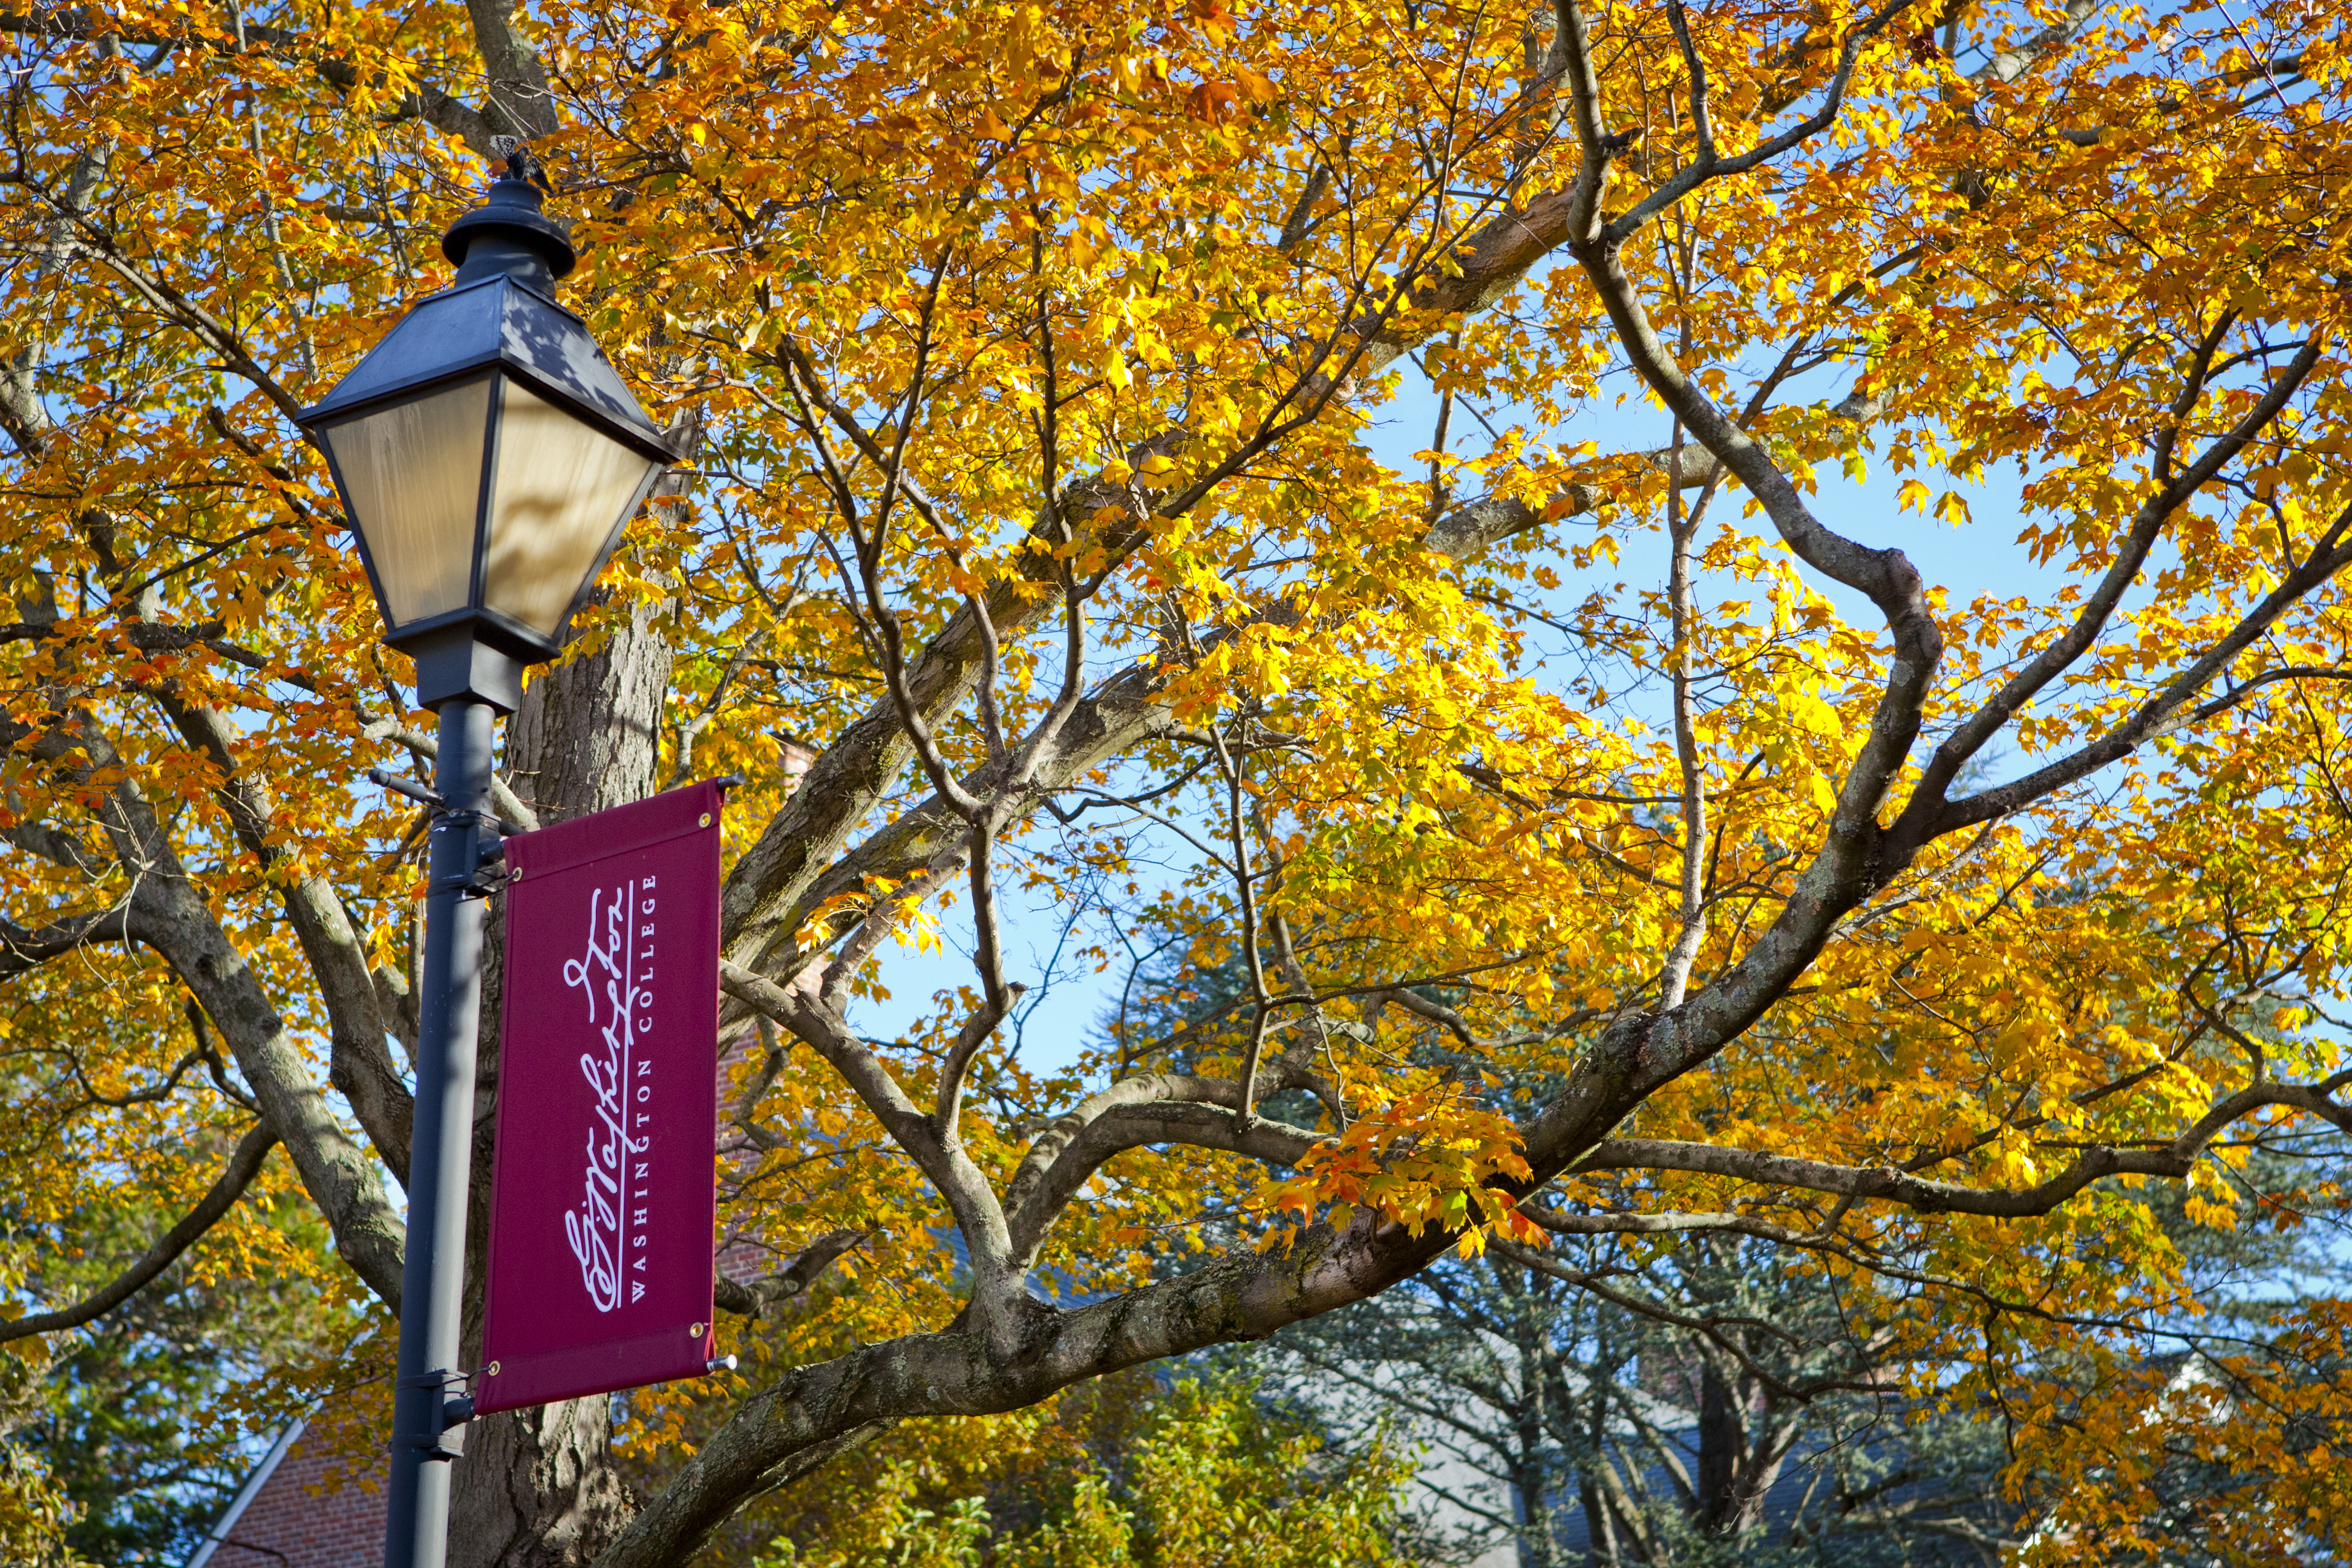 Washington College campus in autumn with orange leaves and a lamppost bearing a Washington College flag.